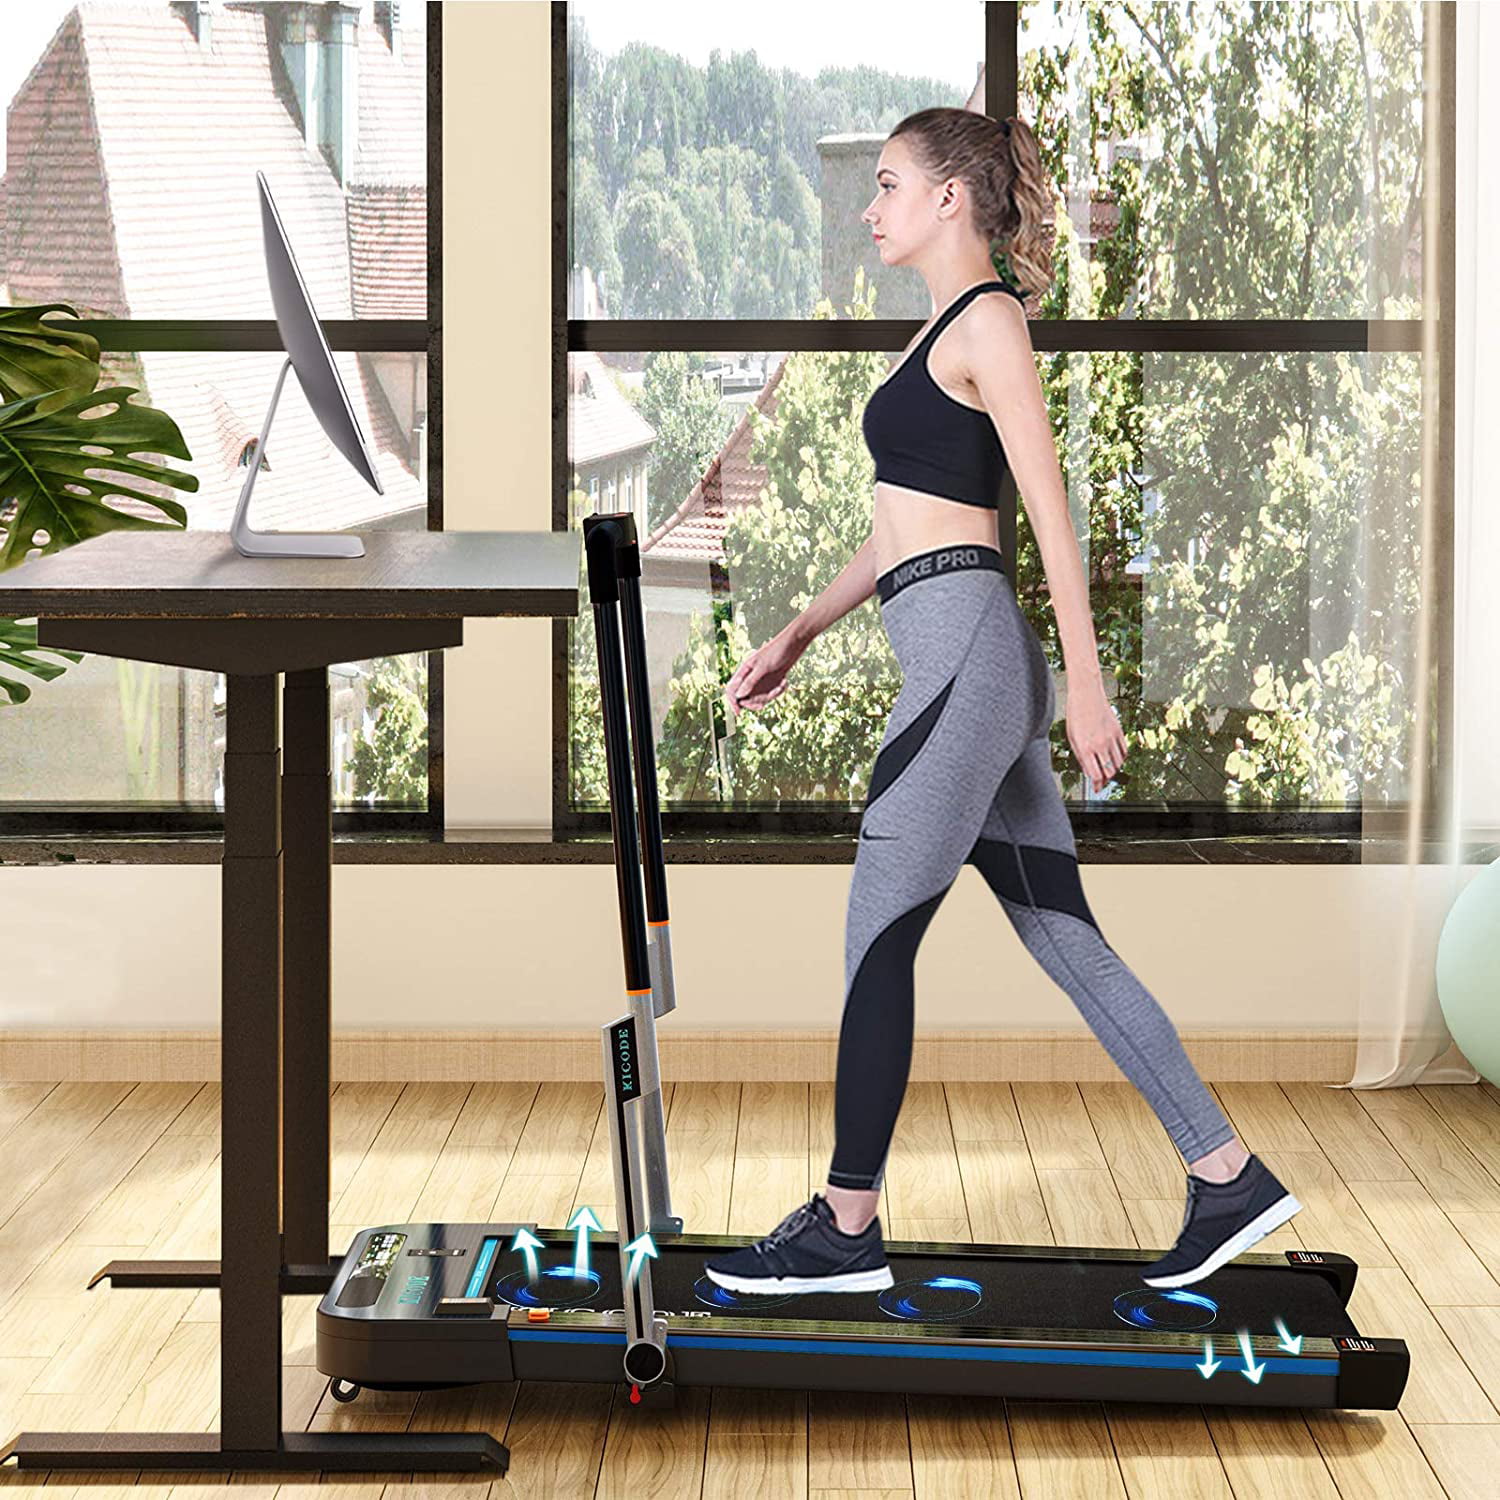 FUNMILY Treadmills for Home Treadmill with LCD Motorized Running Walking Jogging Exercise Fitness Machine Trainer Equipment for Gym Home Office 